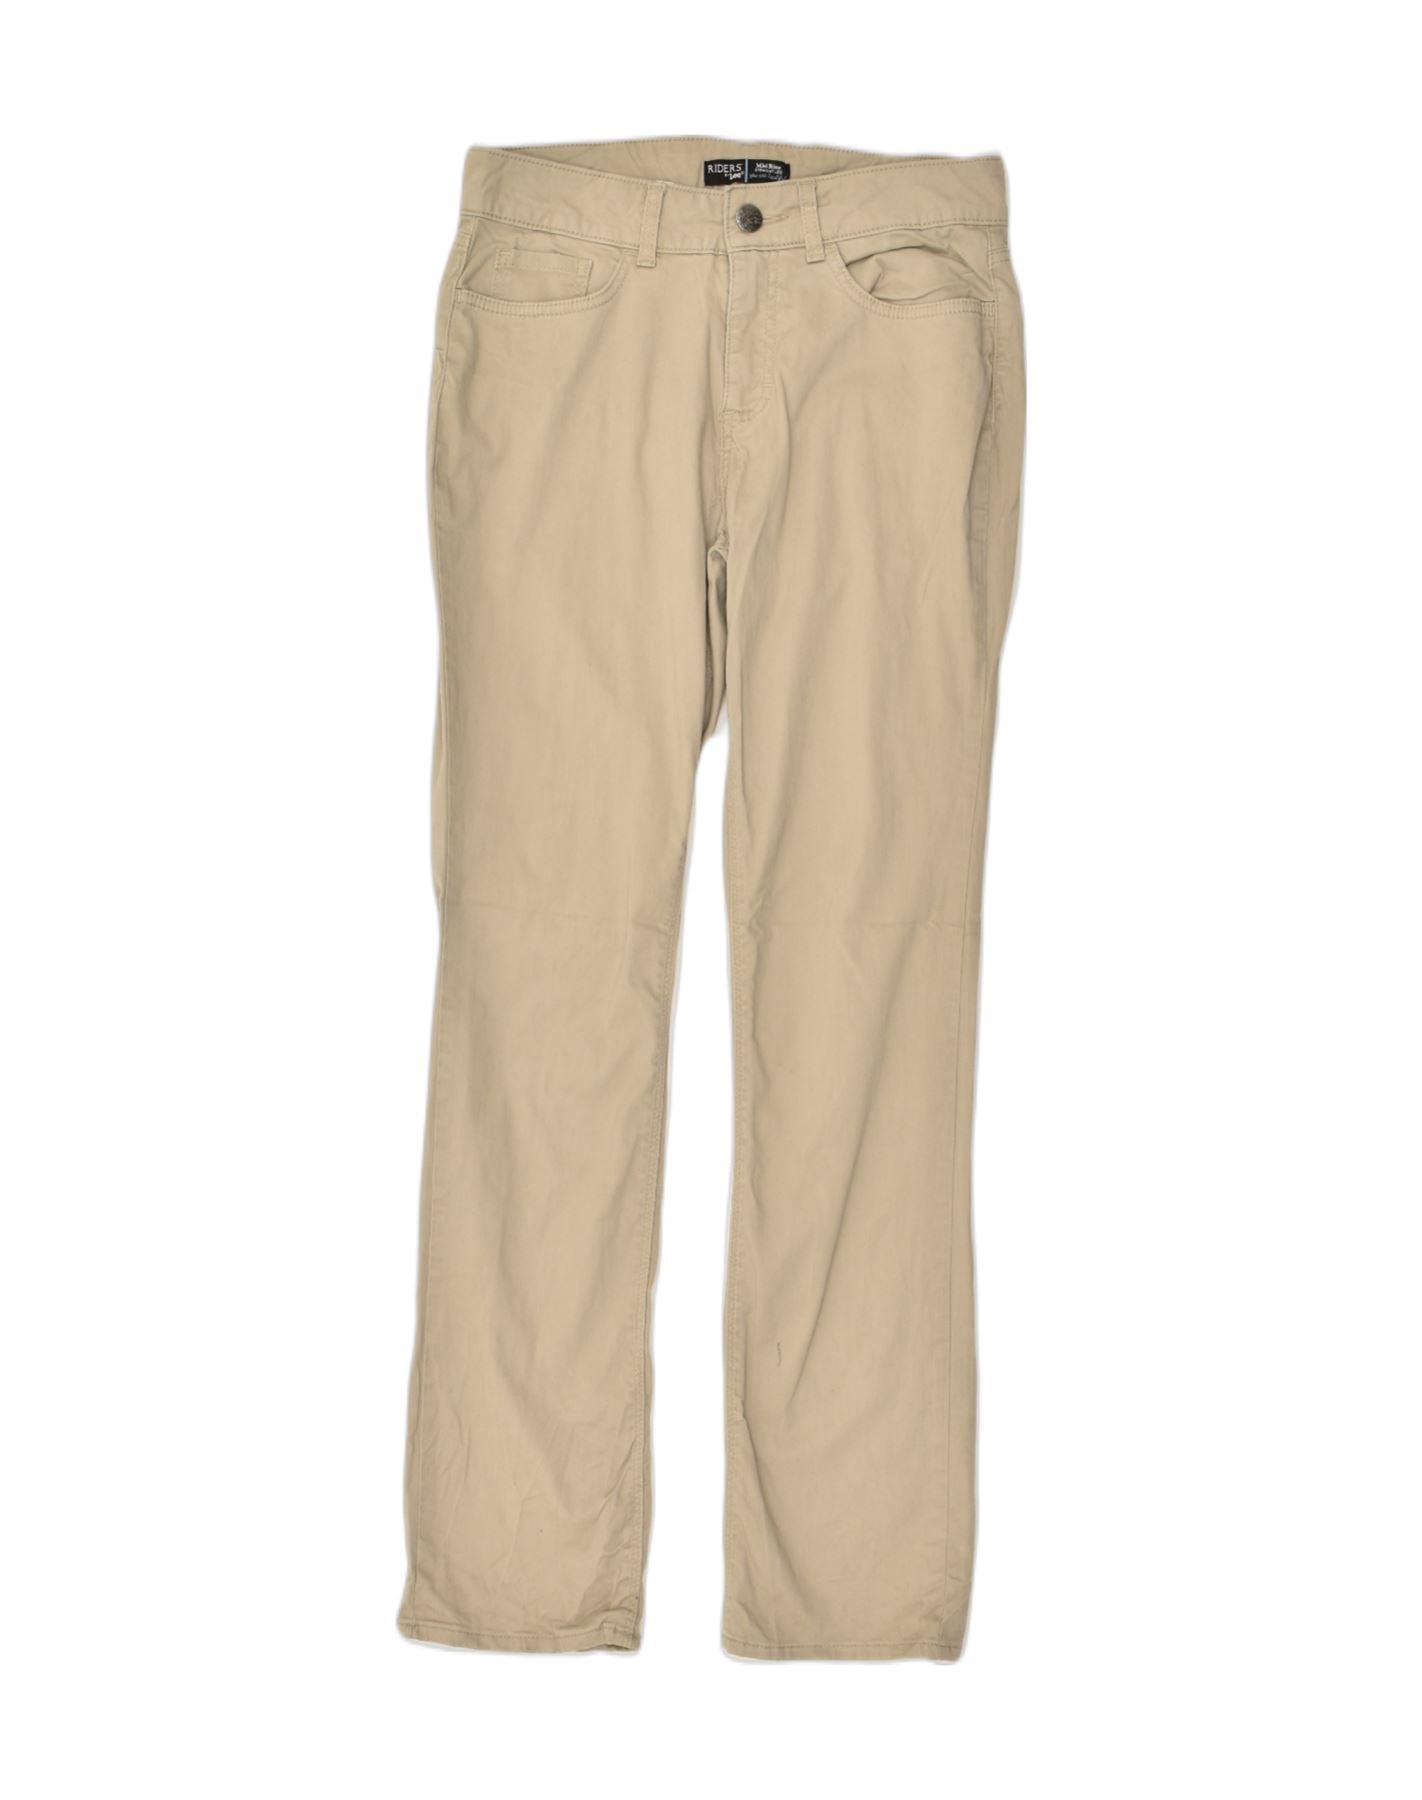 LEE Womens Mid Rise Straight Casual Trousers US 10 Large W30 L30 Beige, Vintage & Second-Hand Clothing Online